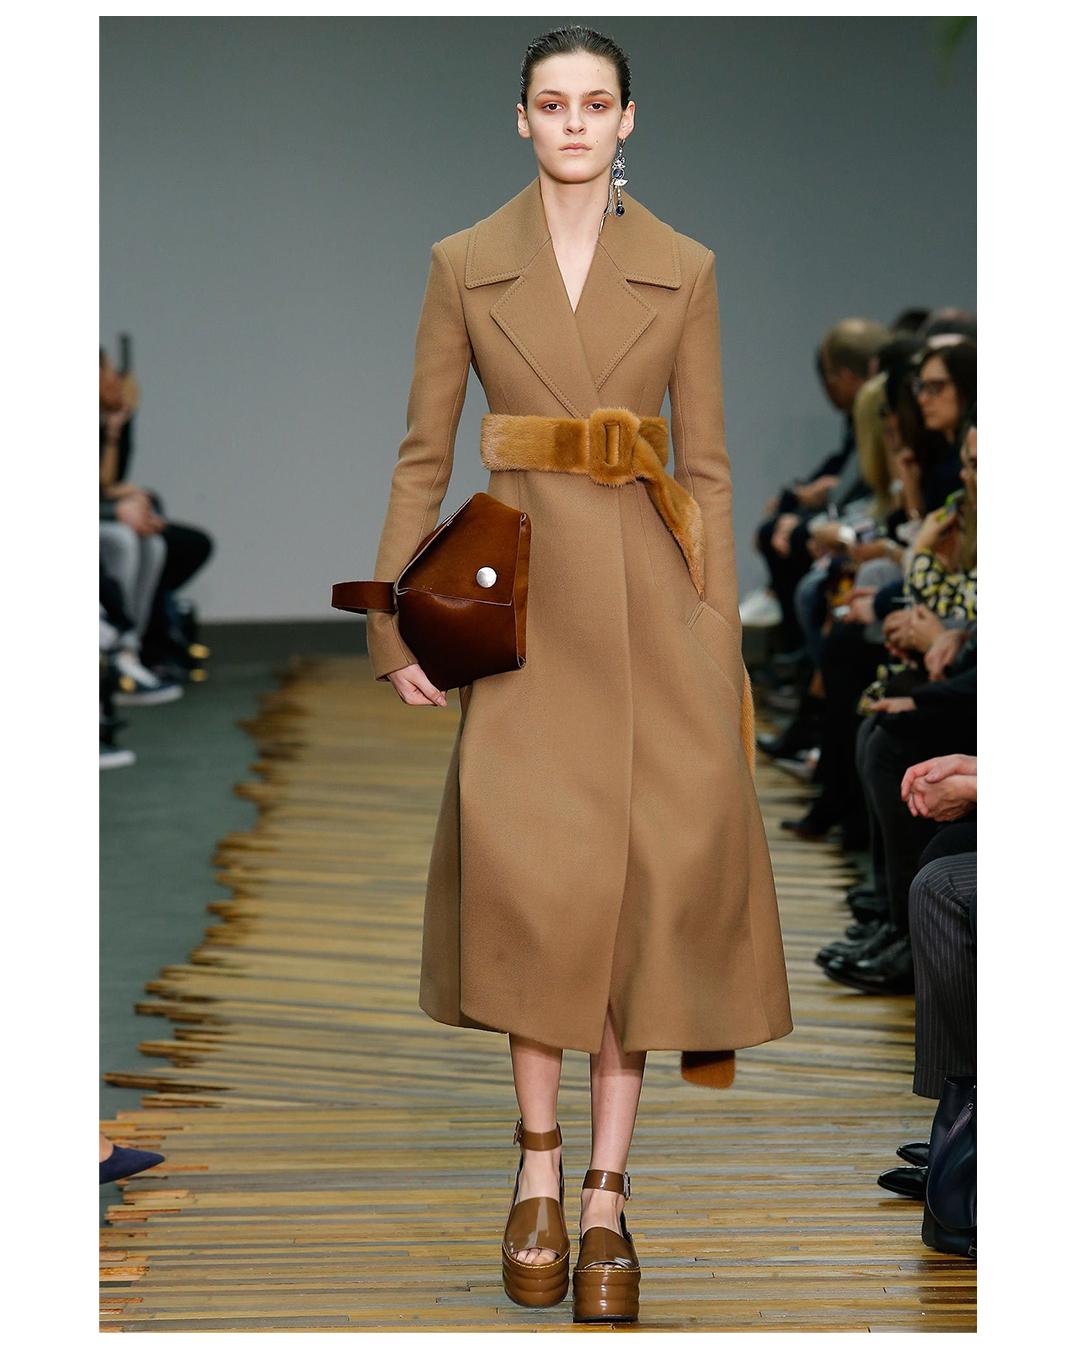 Women's Celine Fall 2014 Phoebe Philo  gabardine wool fit and flare maxi coat in camel